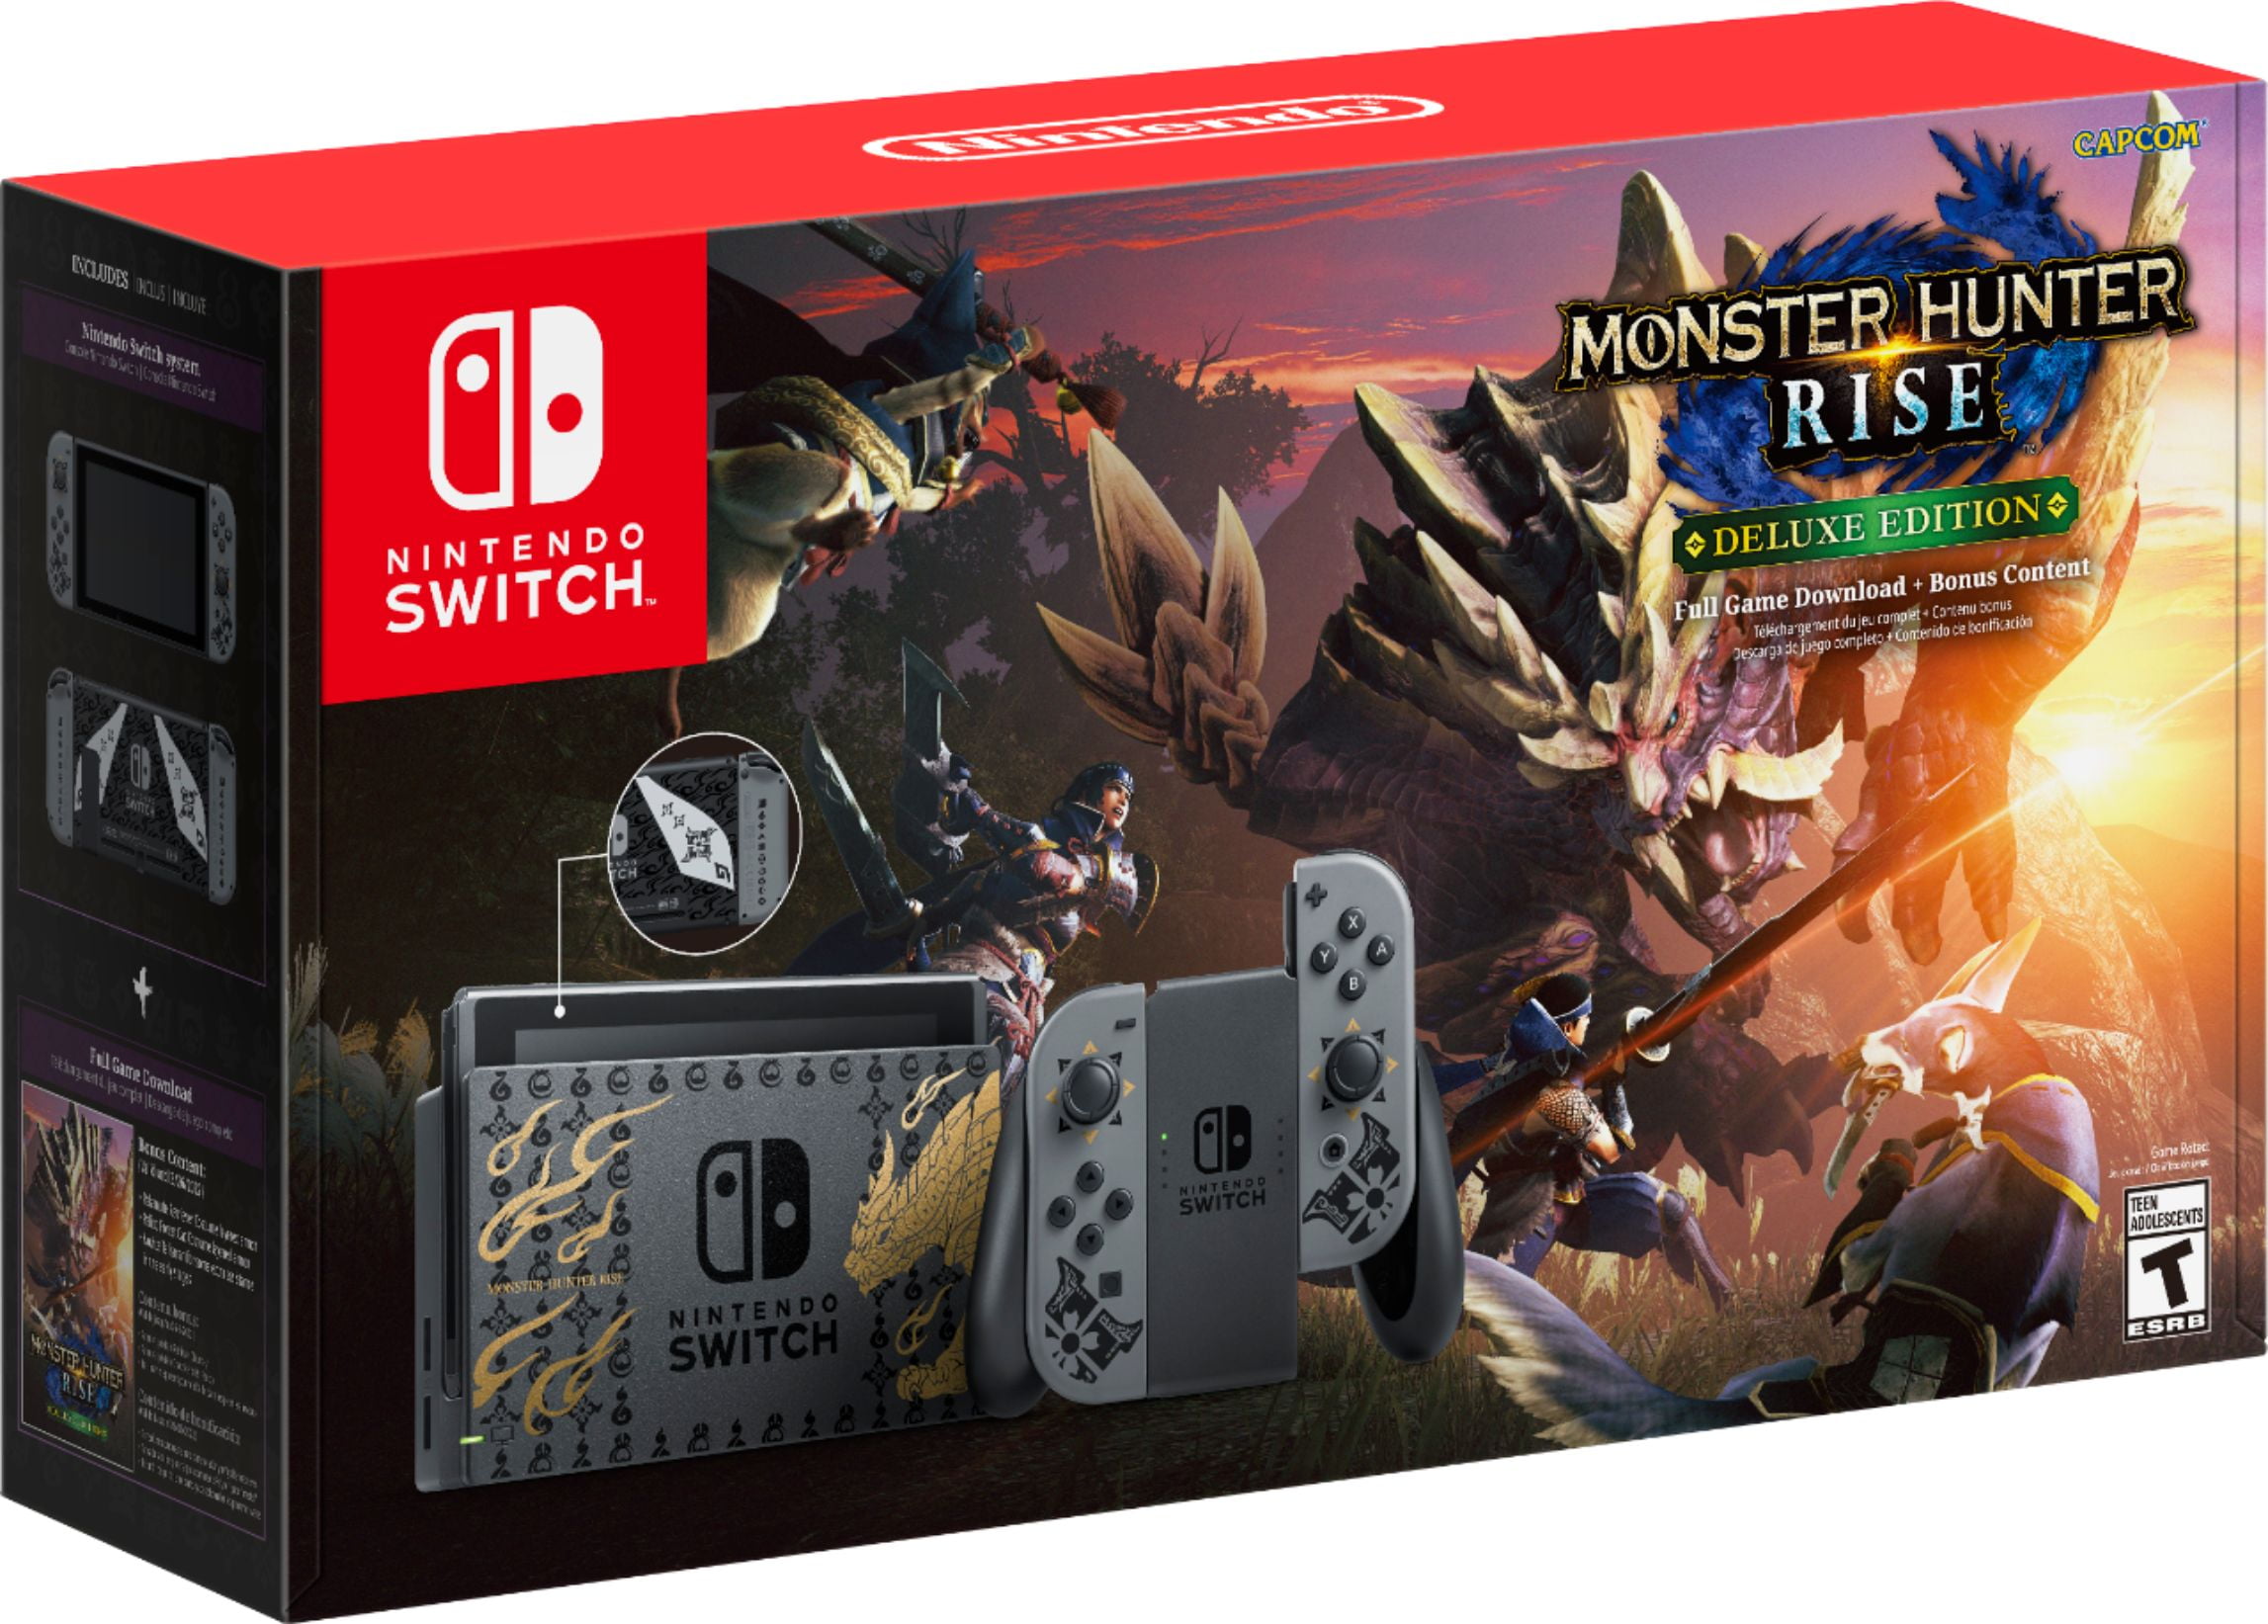 Deluxe Gray Nintendo HUNTER Edition - Switch RISE System MONSTER